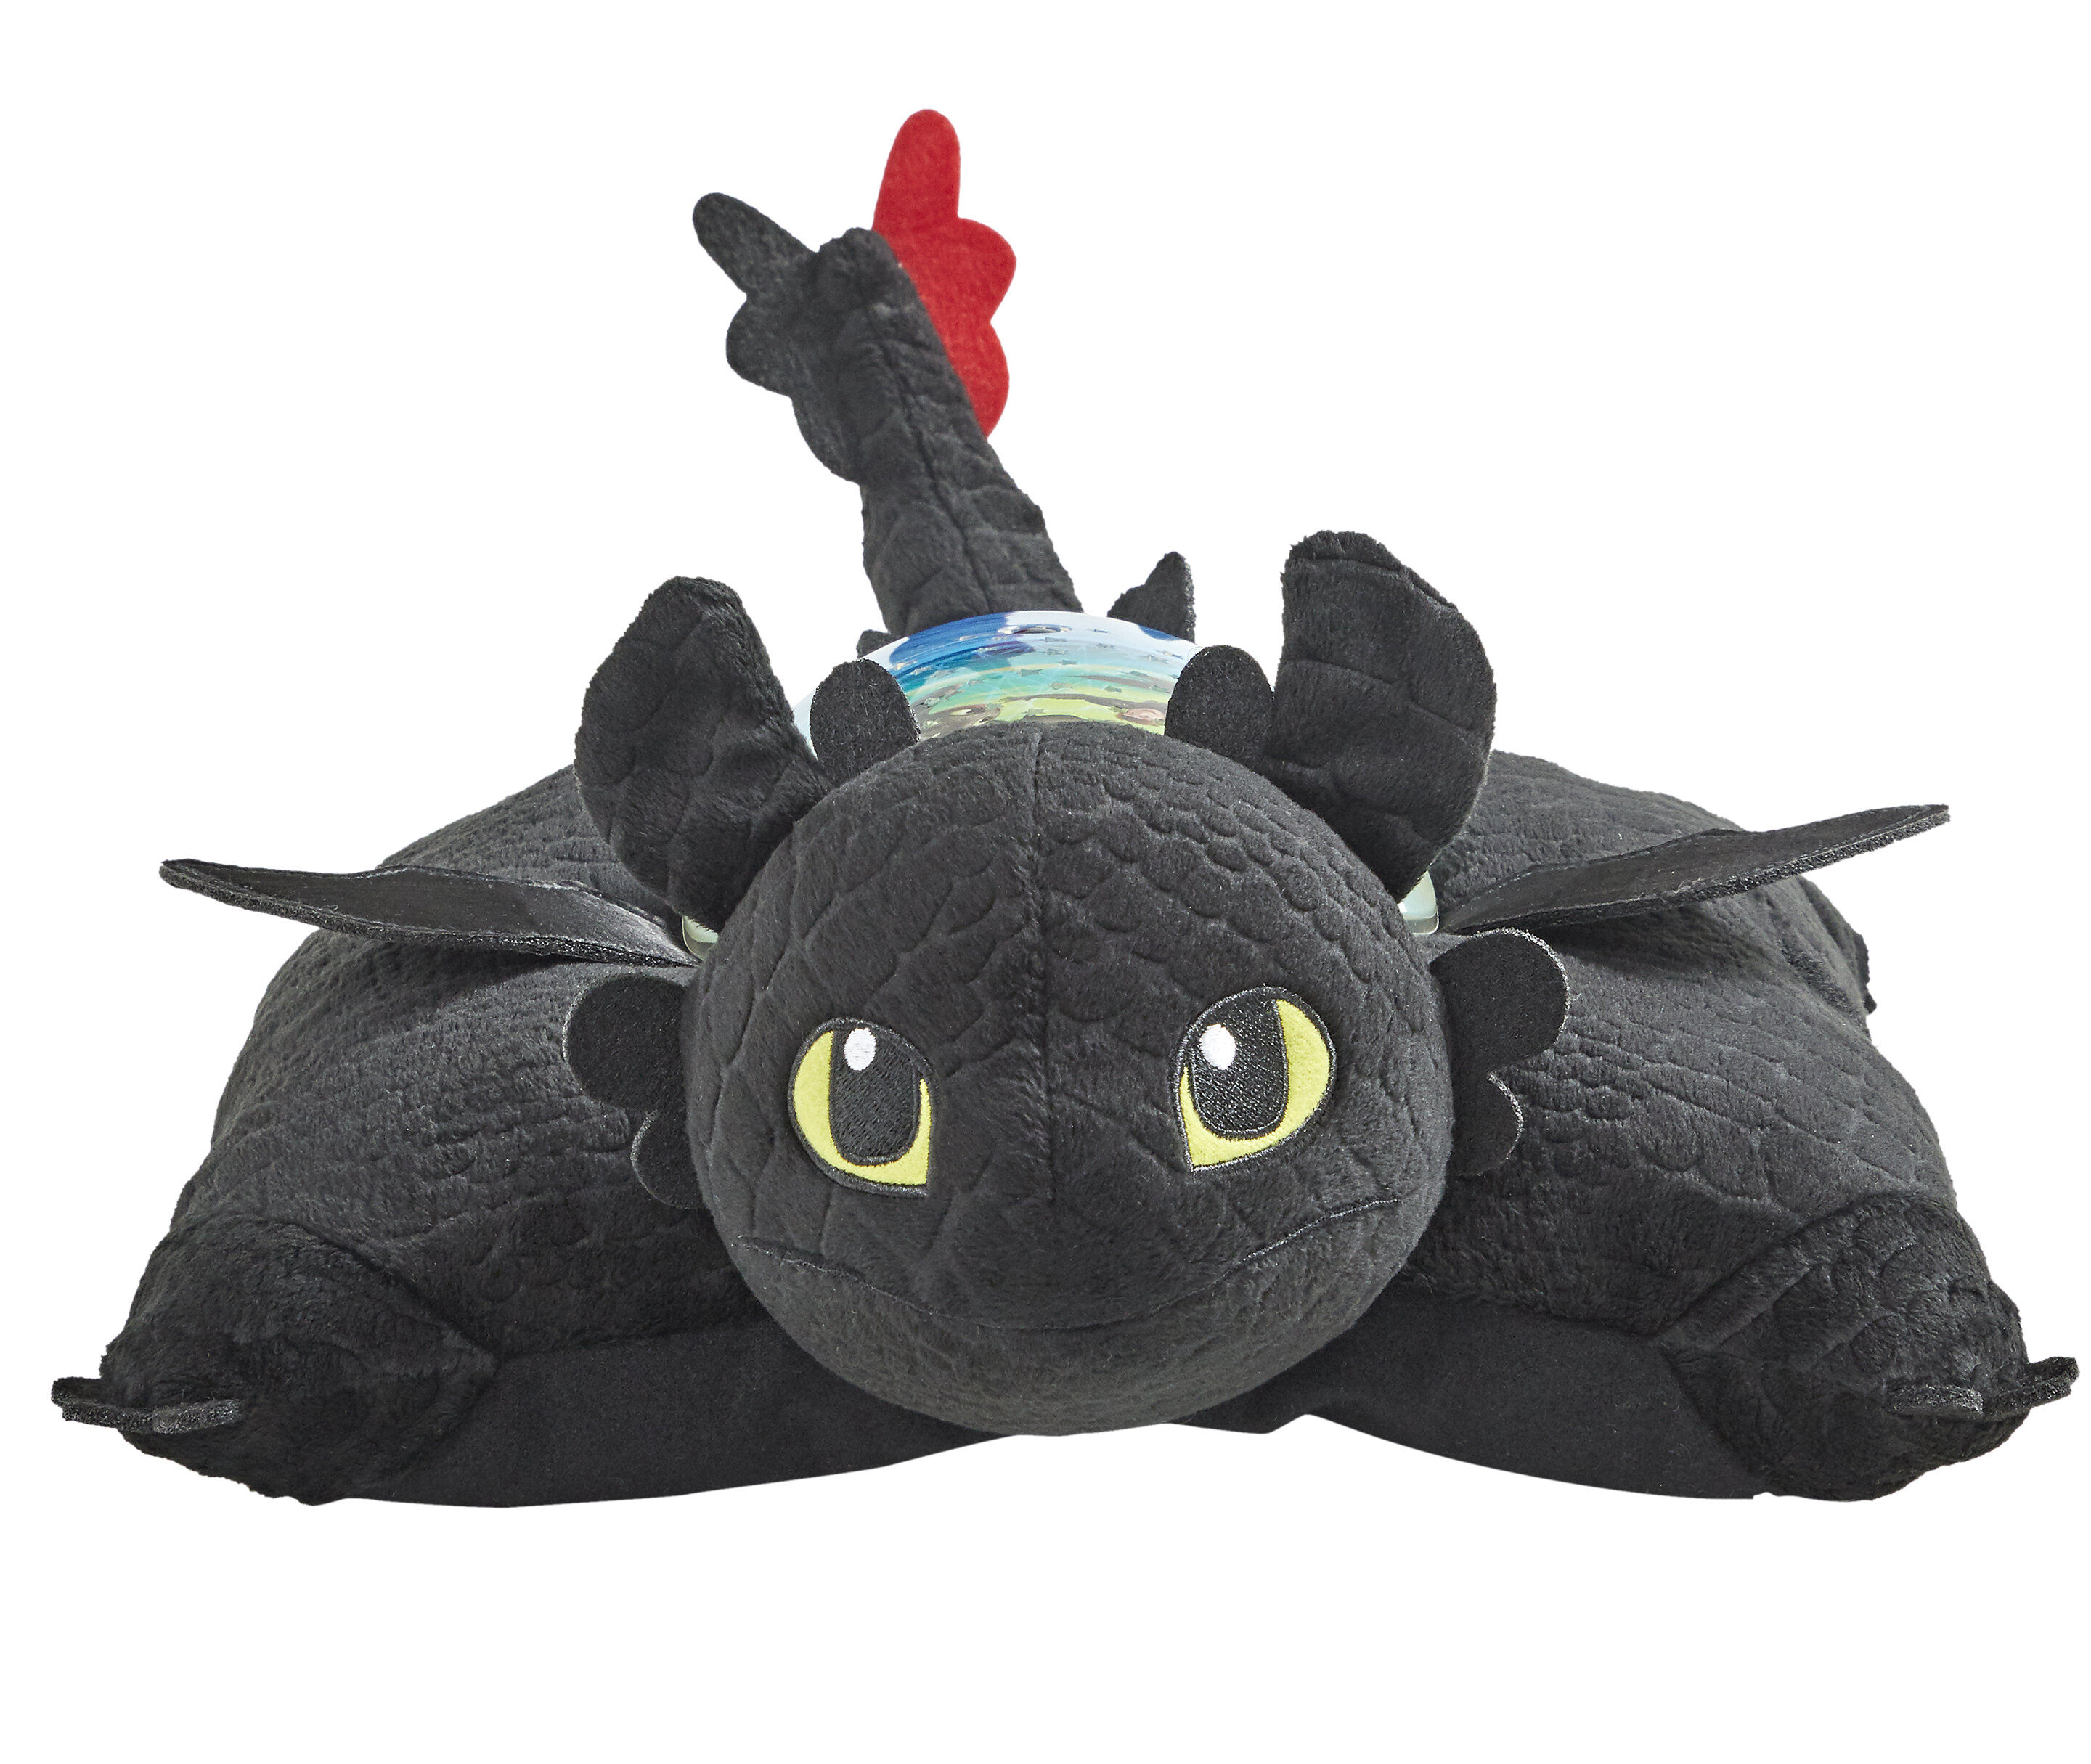 stuffed animal that projects stars on ceiling